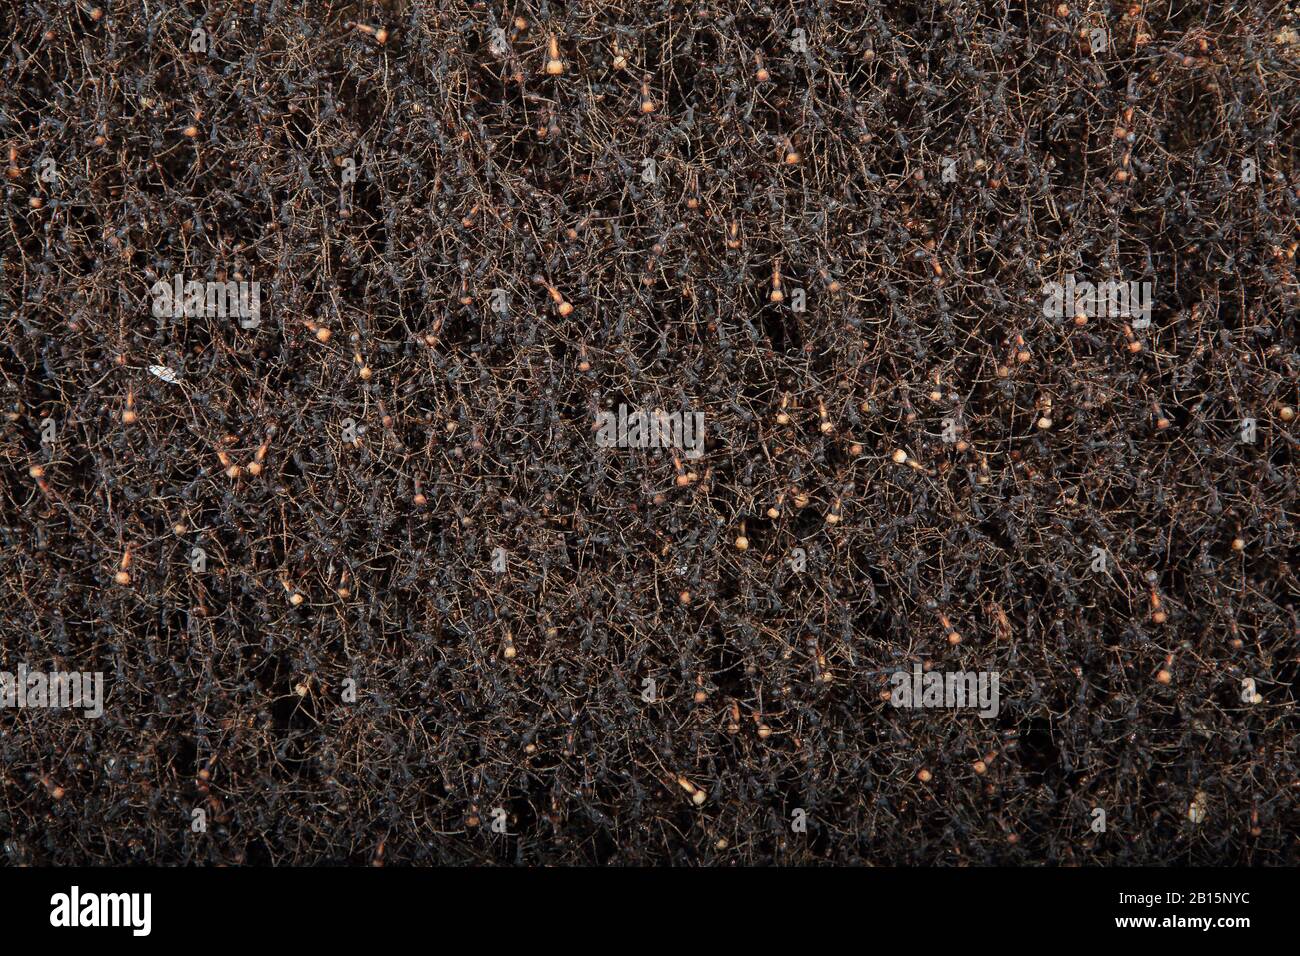 Bivouac of Army Ants (Eciton burchellii) on tropical dry forest floor, Santa Rosa National Park, Costa Rica. Stock Photo